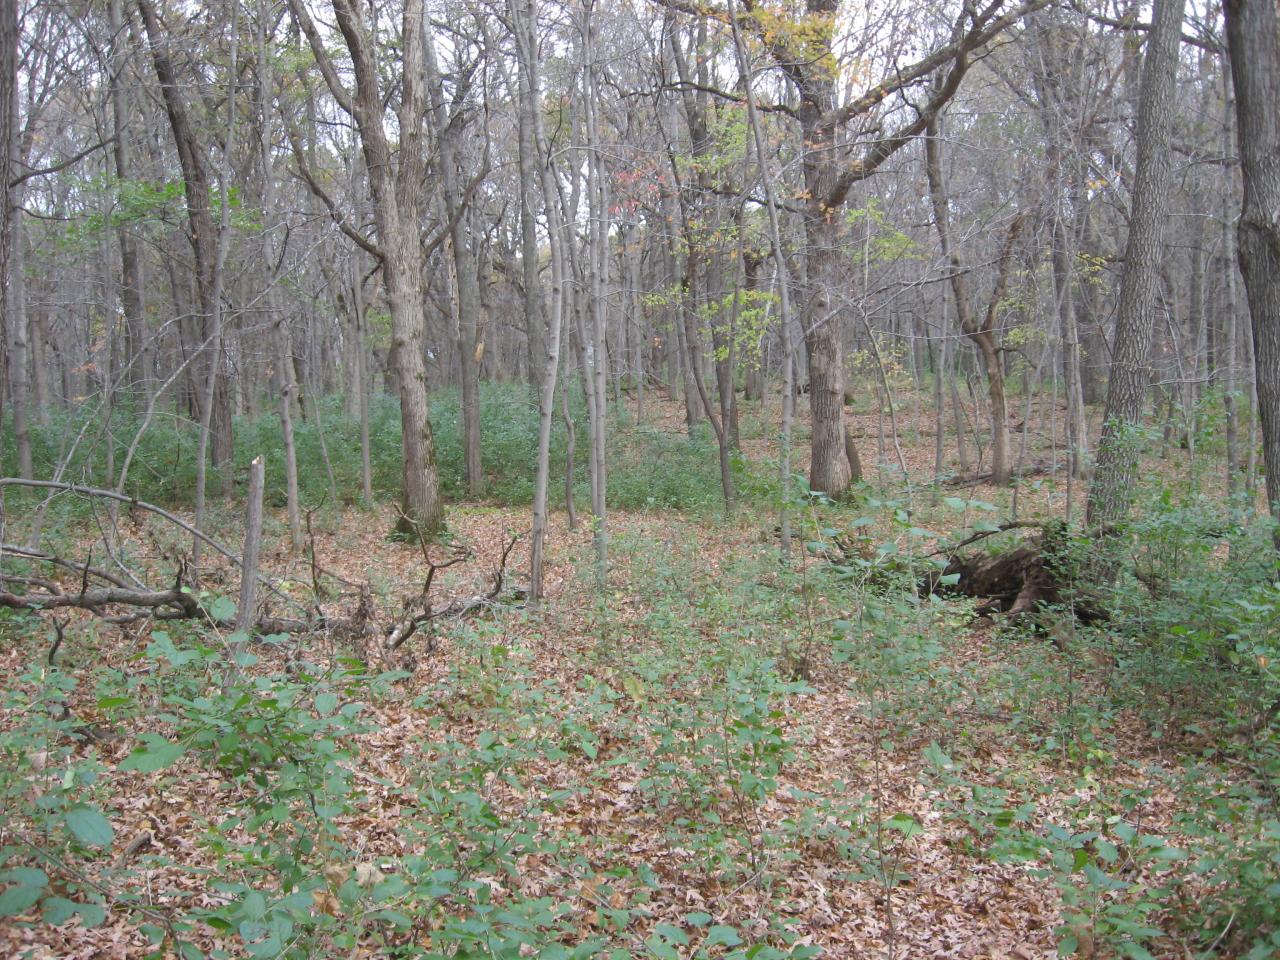 A layer of green on an otherwise gray and brown backdrop is evidence of buckthorn’s distinctive phenology.